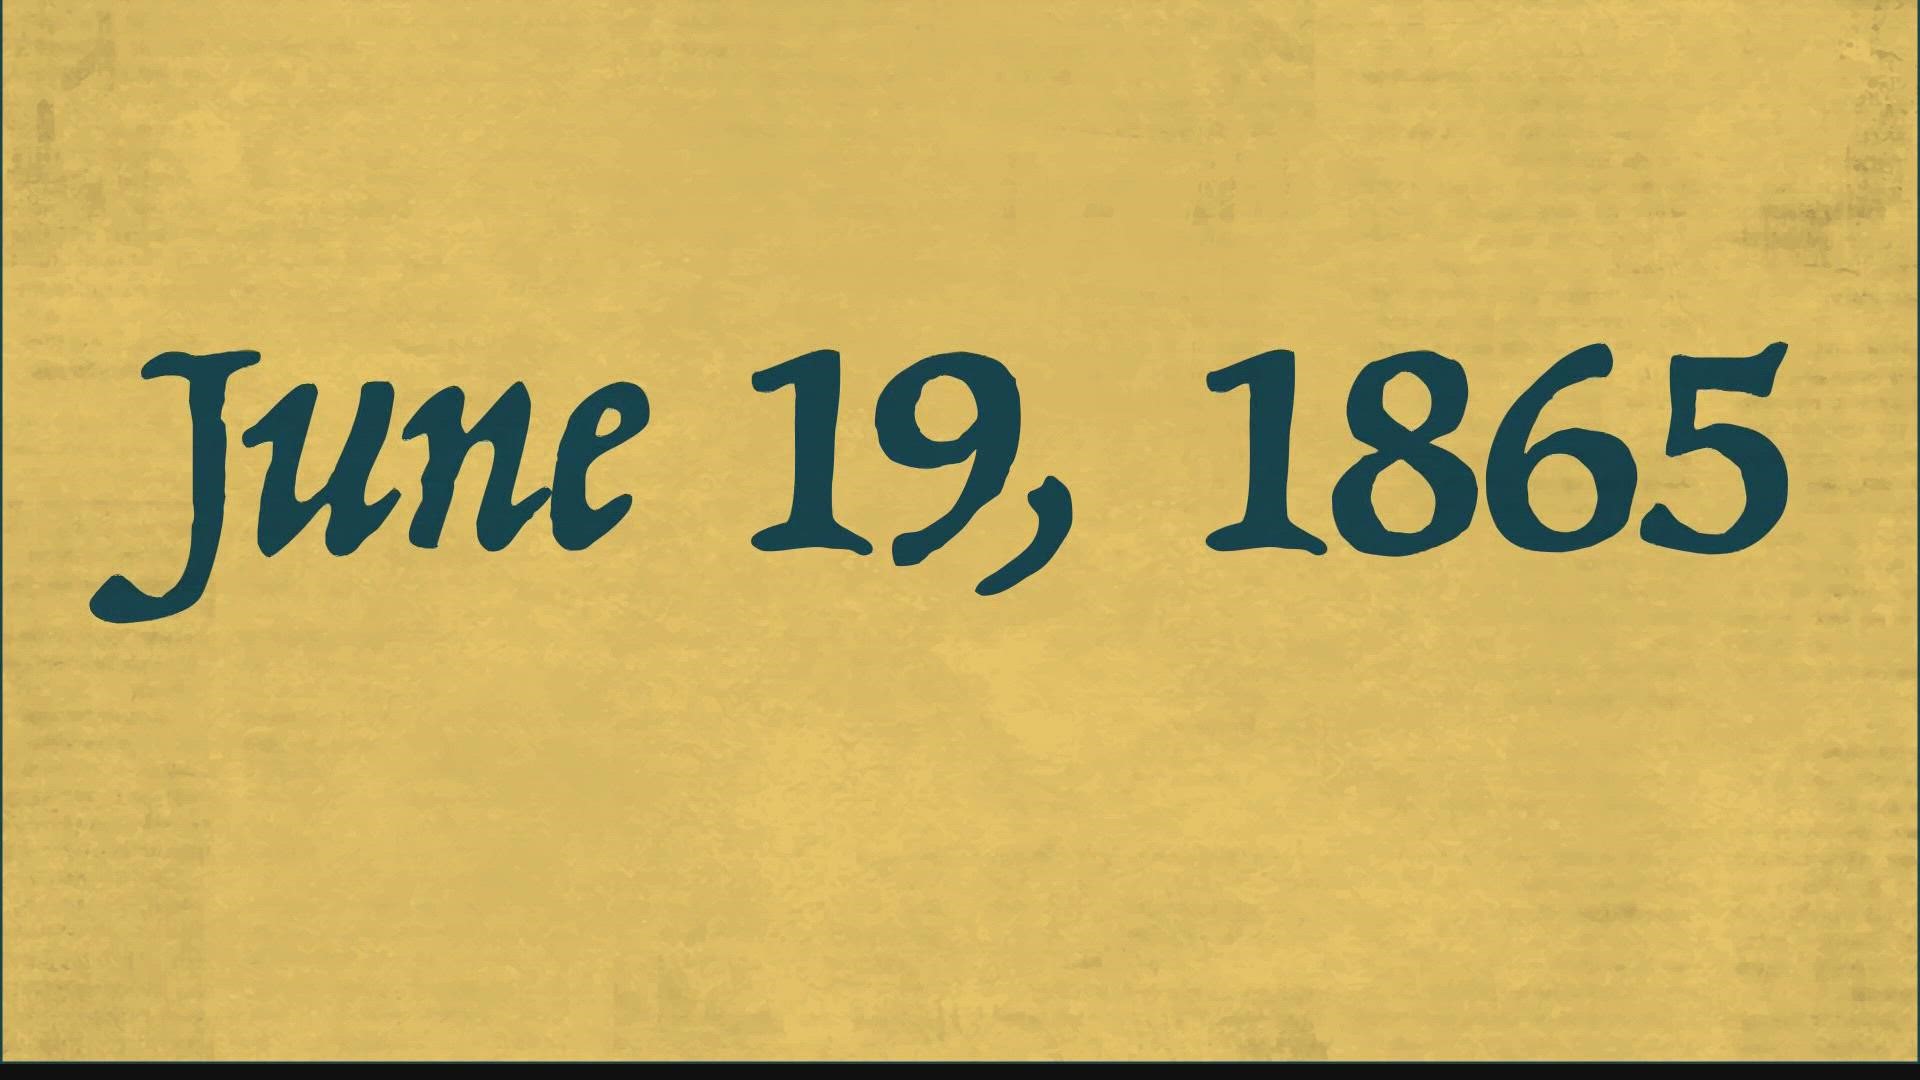 June 19th commemorates the emancipation of enslaved people in the United States.